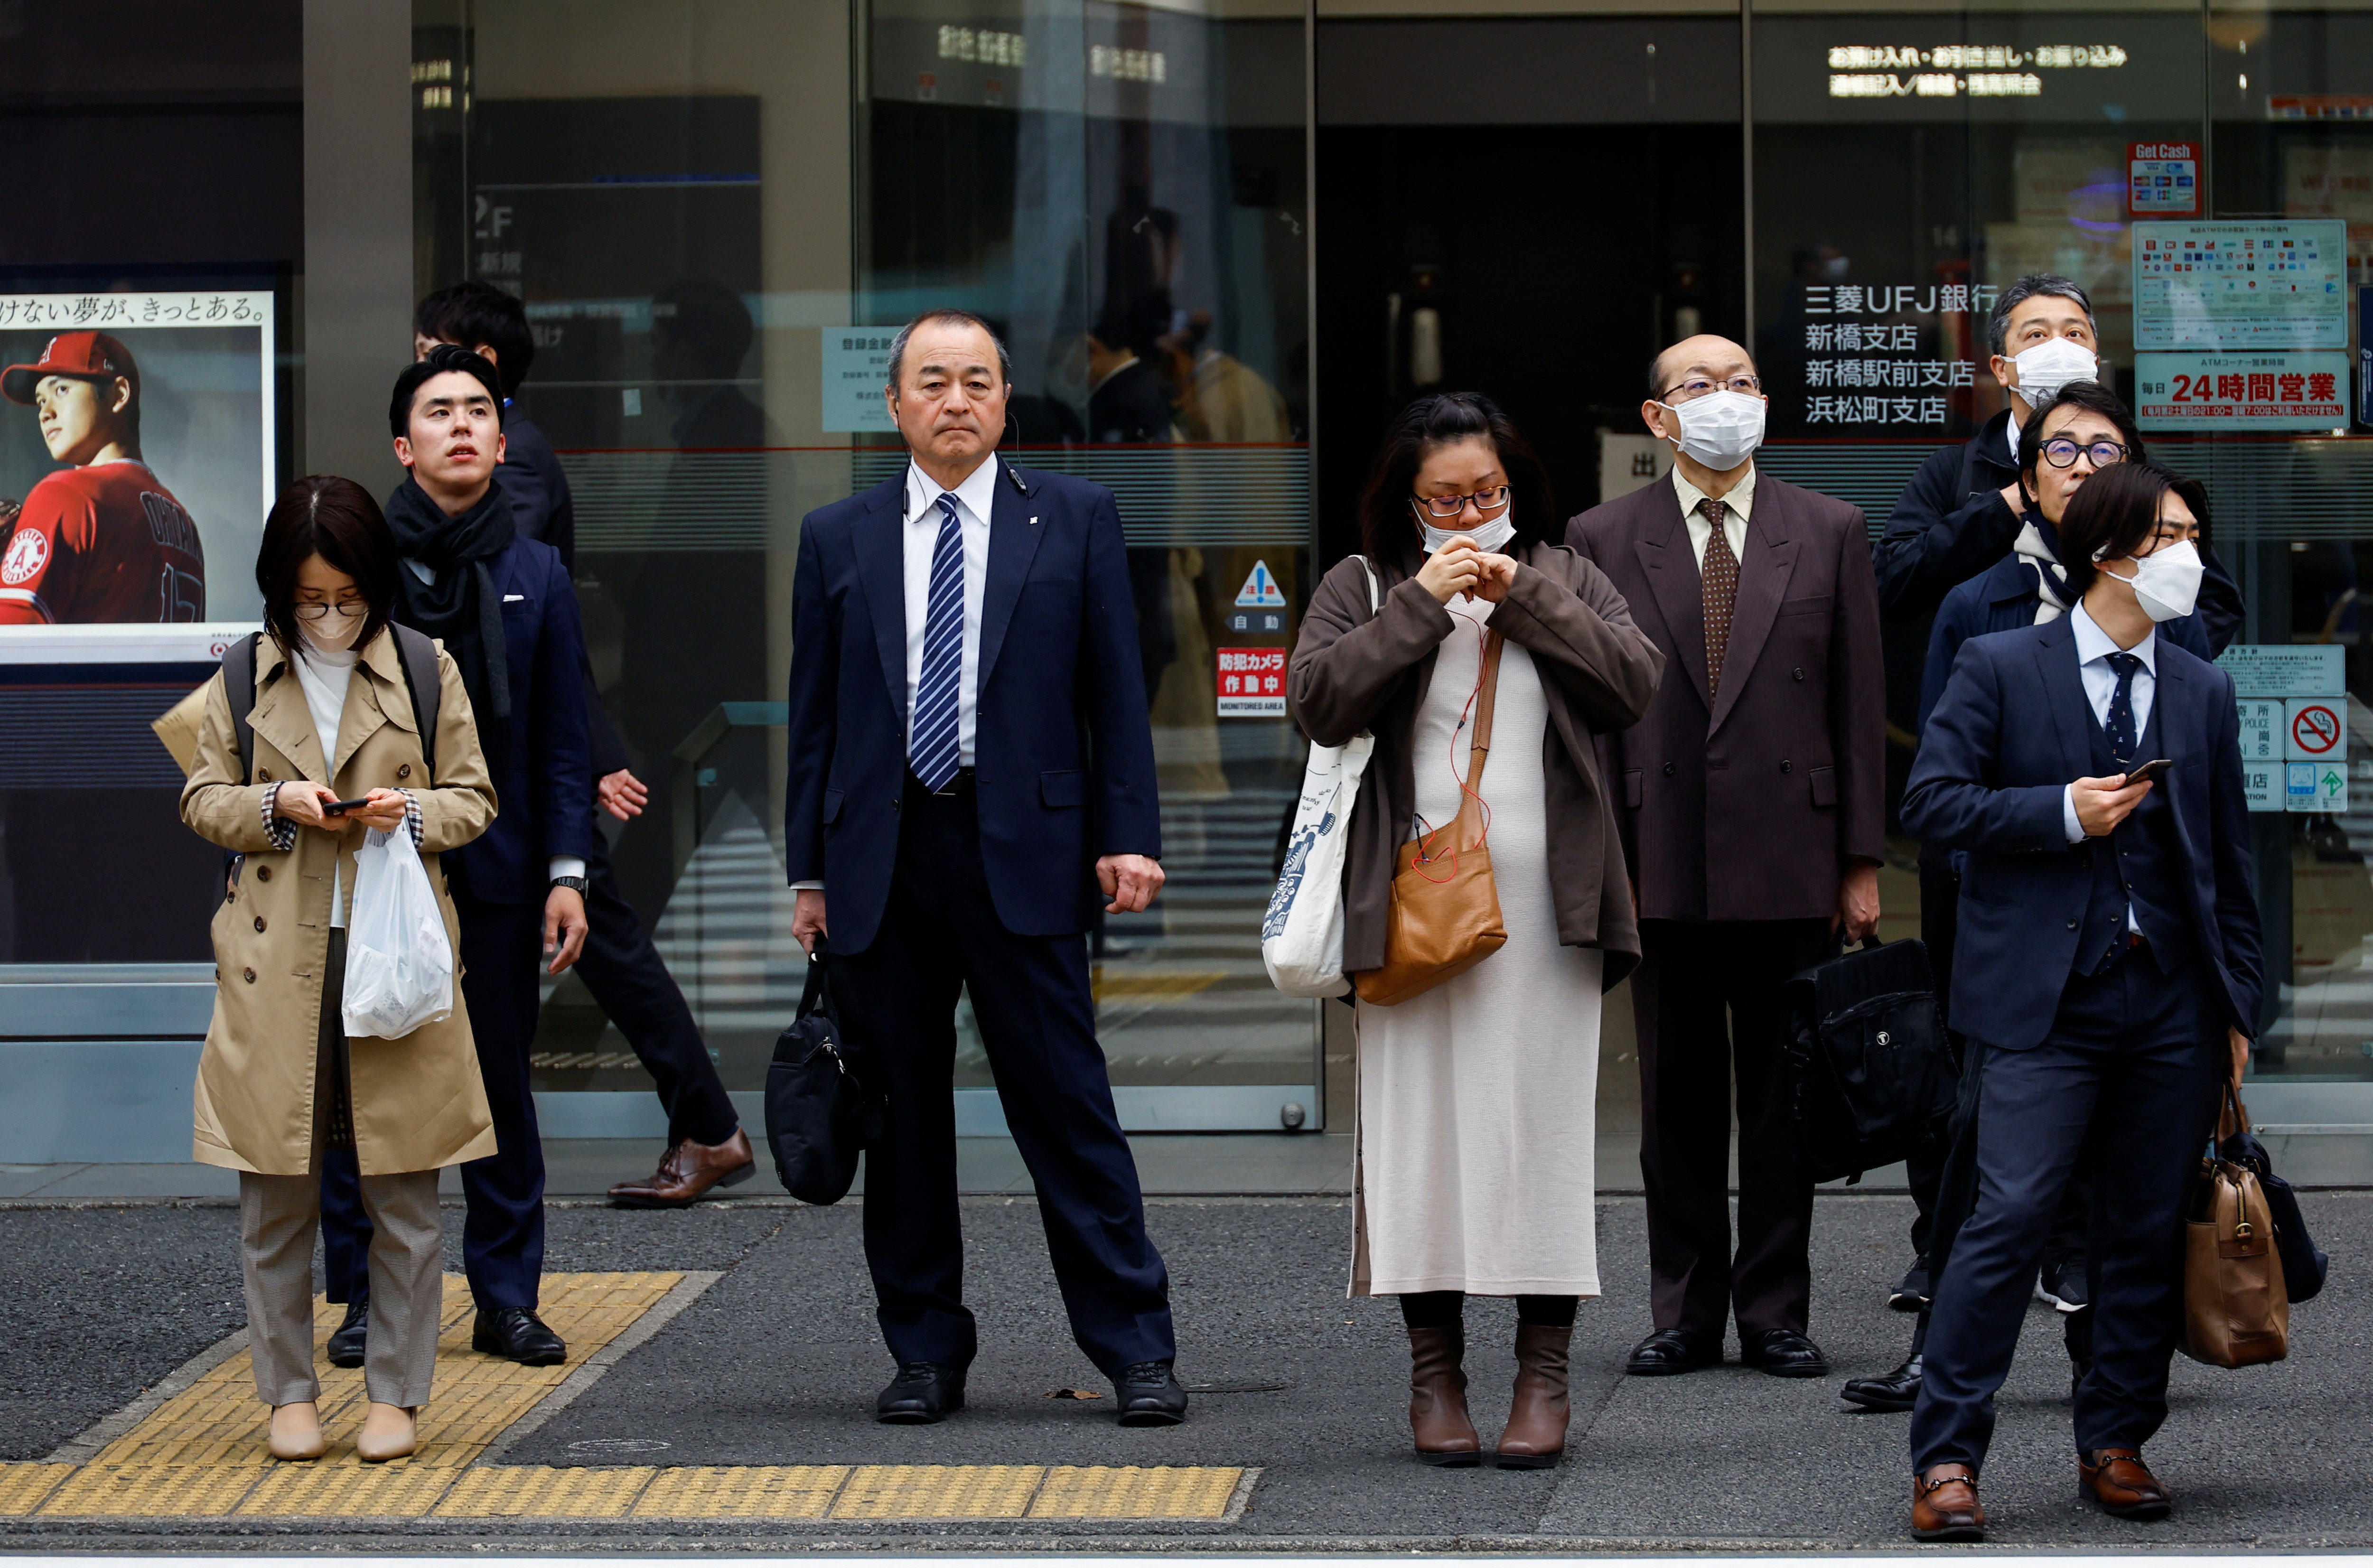 Commuters make their way on the first day of the Japanese government's relaxation of official guidance on masks as it emerges from the COVID-19 pandemic, in Tokyo, Japan March 13, 2023. Photo: Reuters